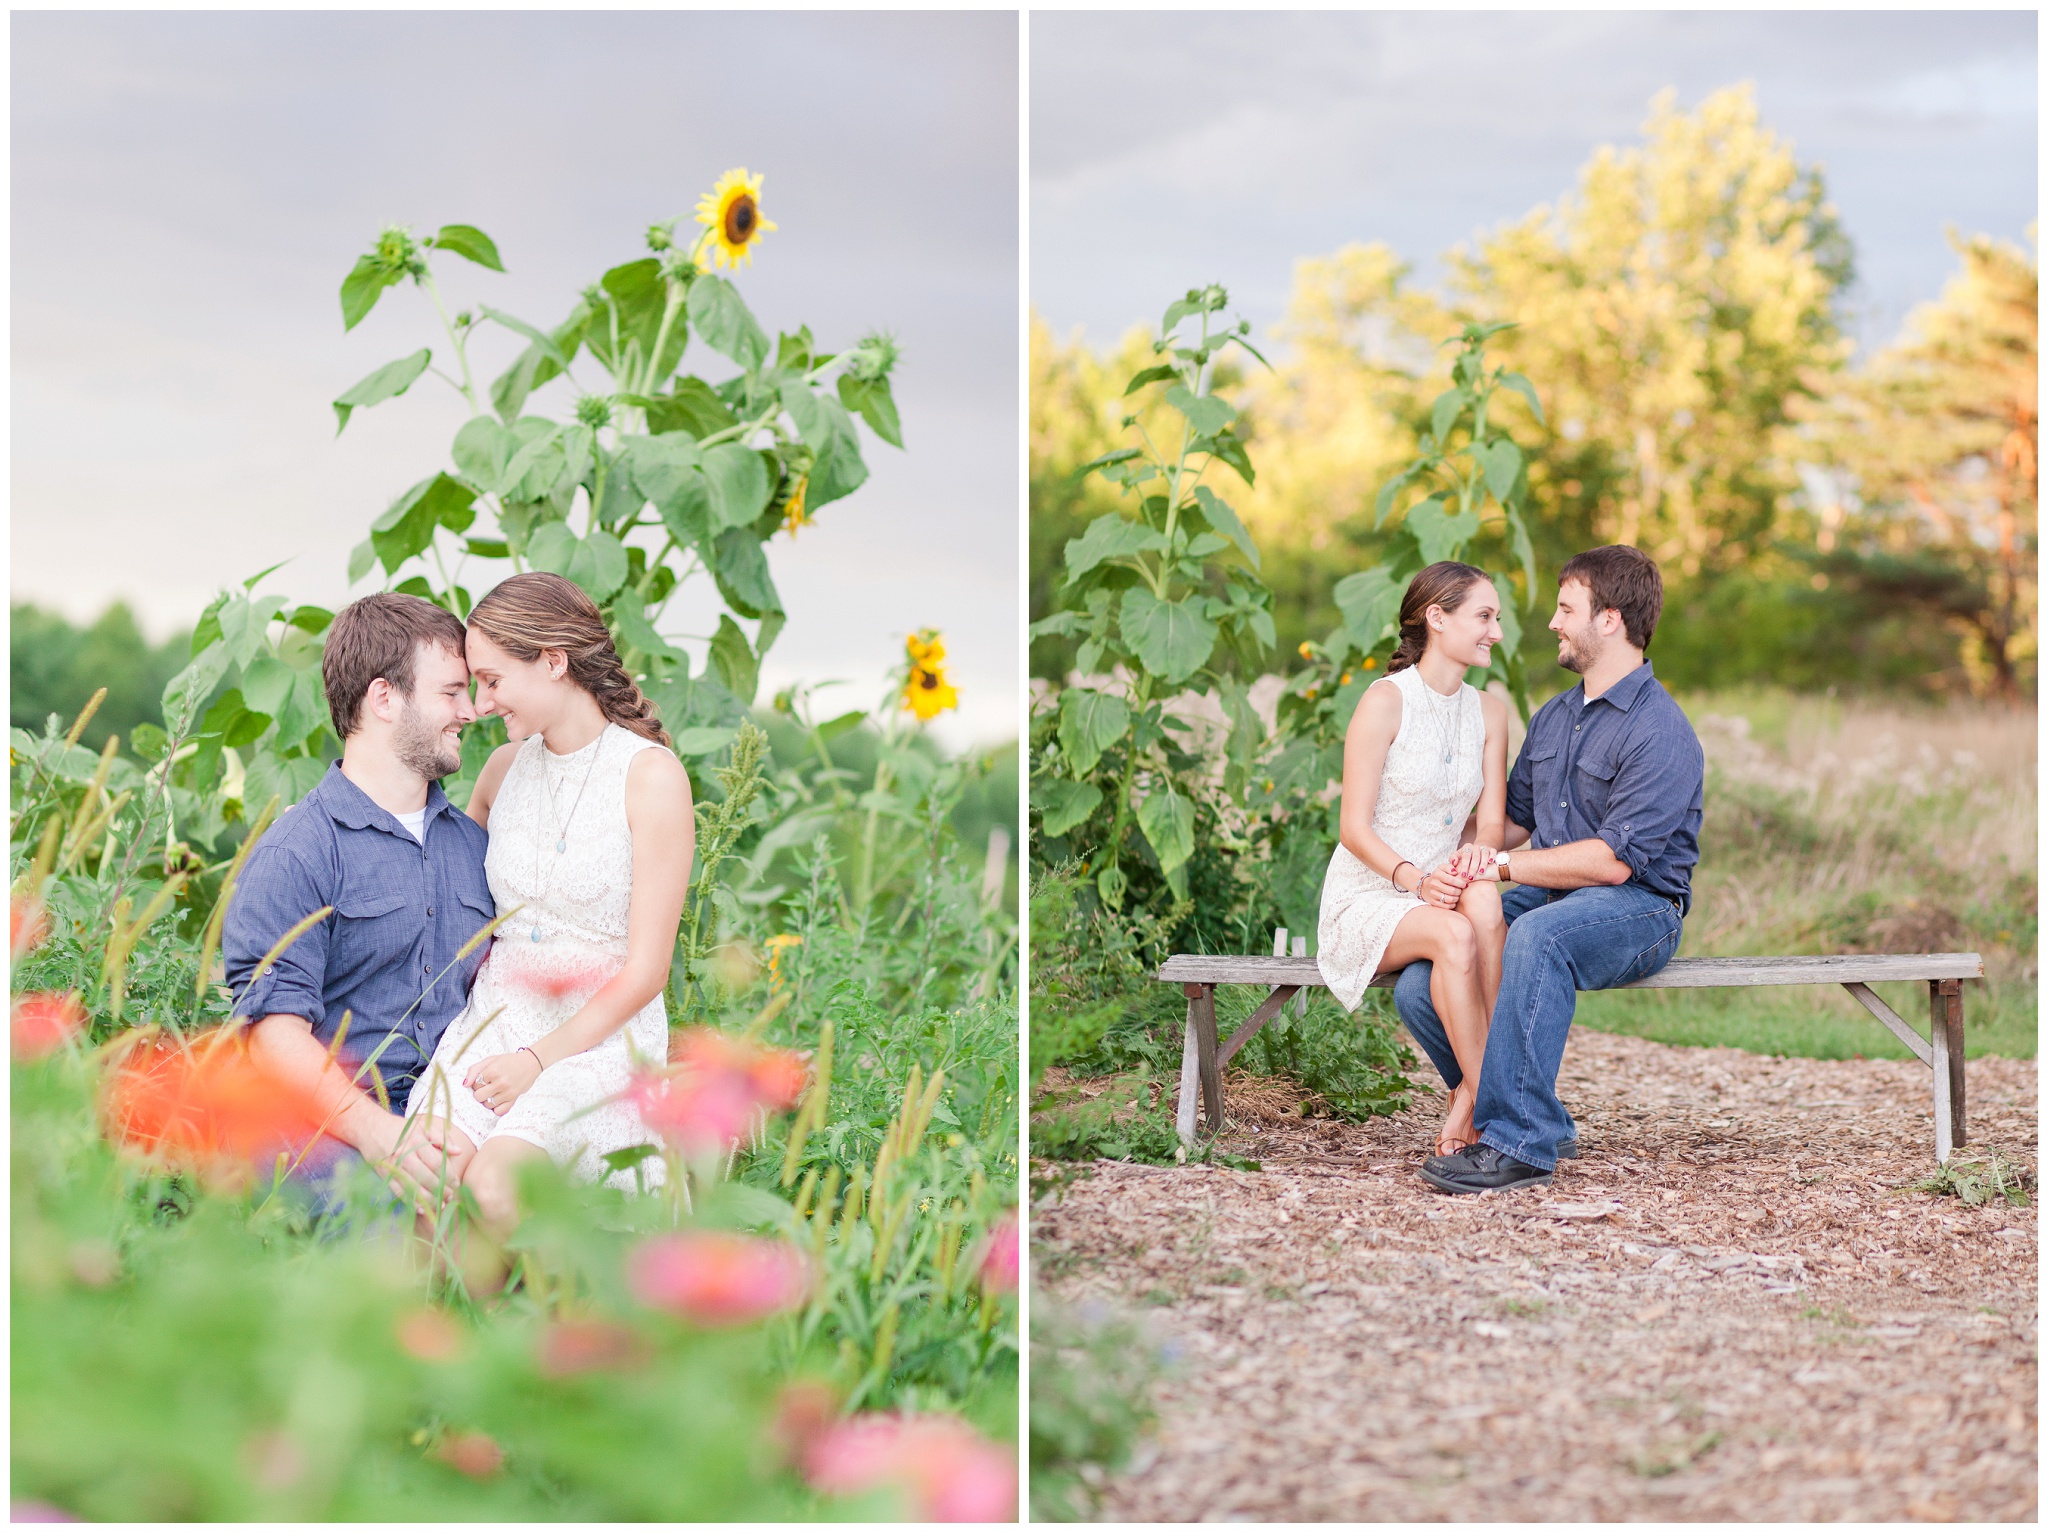 Exeter NH Wedding Photographer | Wagon Hill Durham NH | Engagement Session